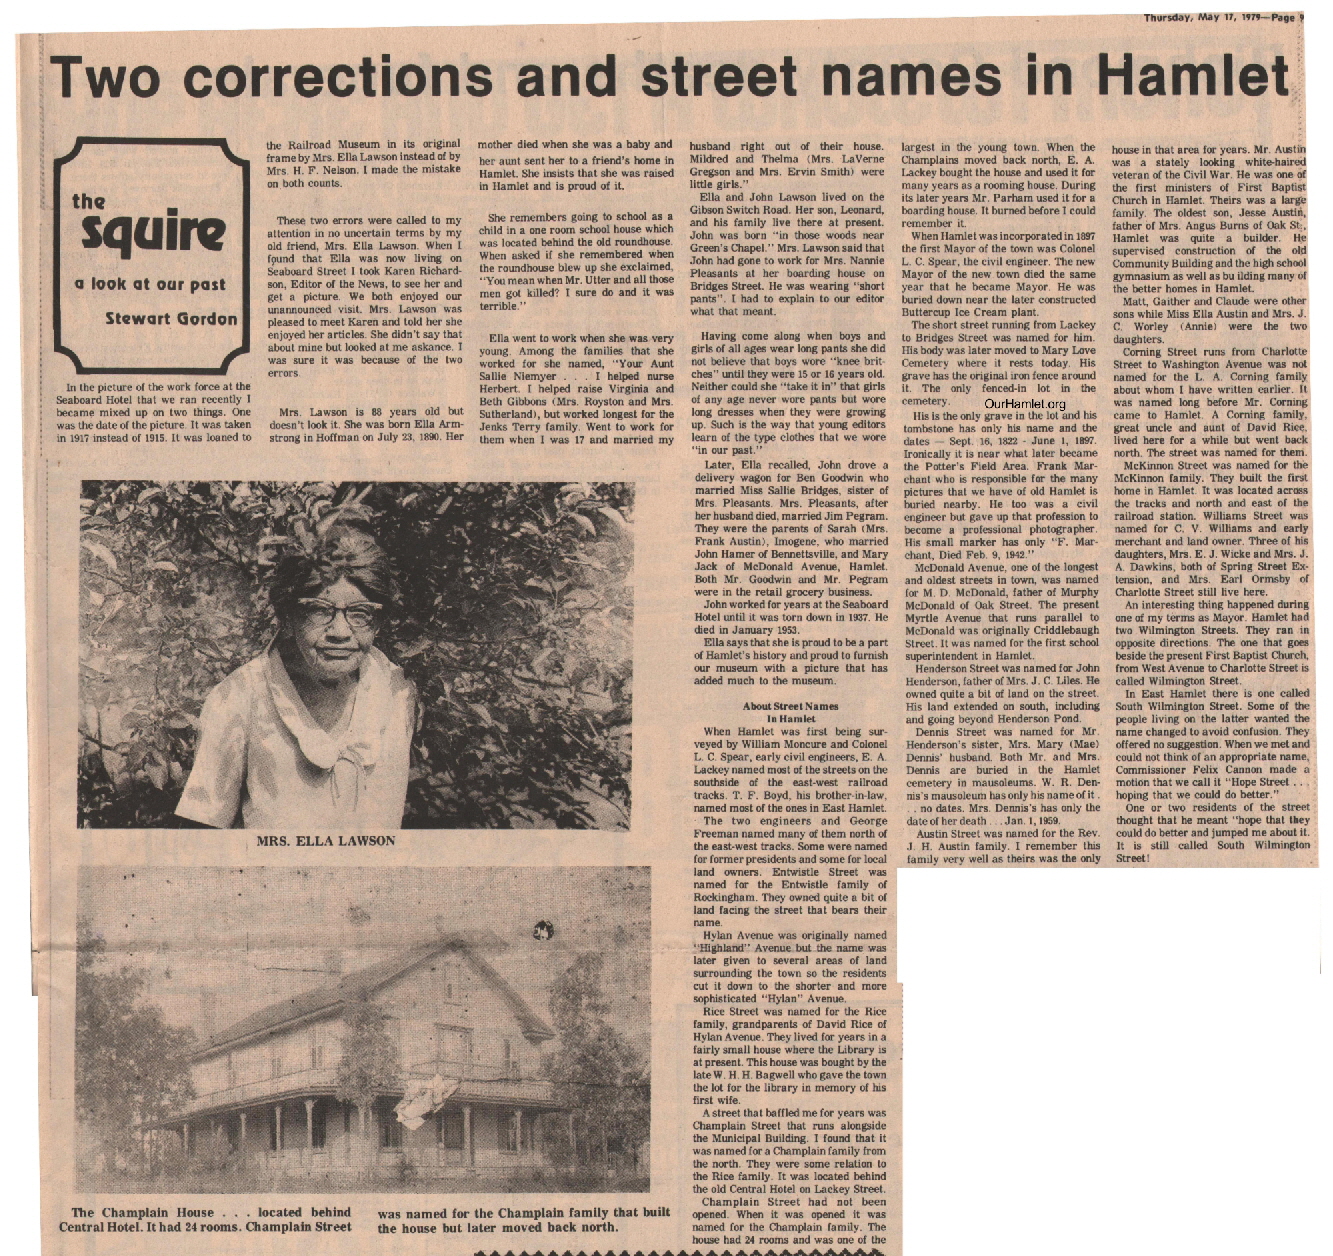 The Squire - Two corrections and street names in Hamlet OH